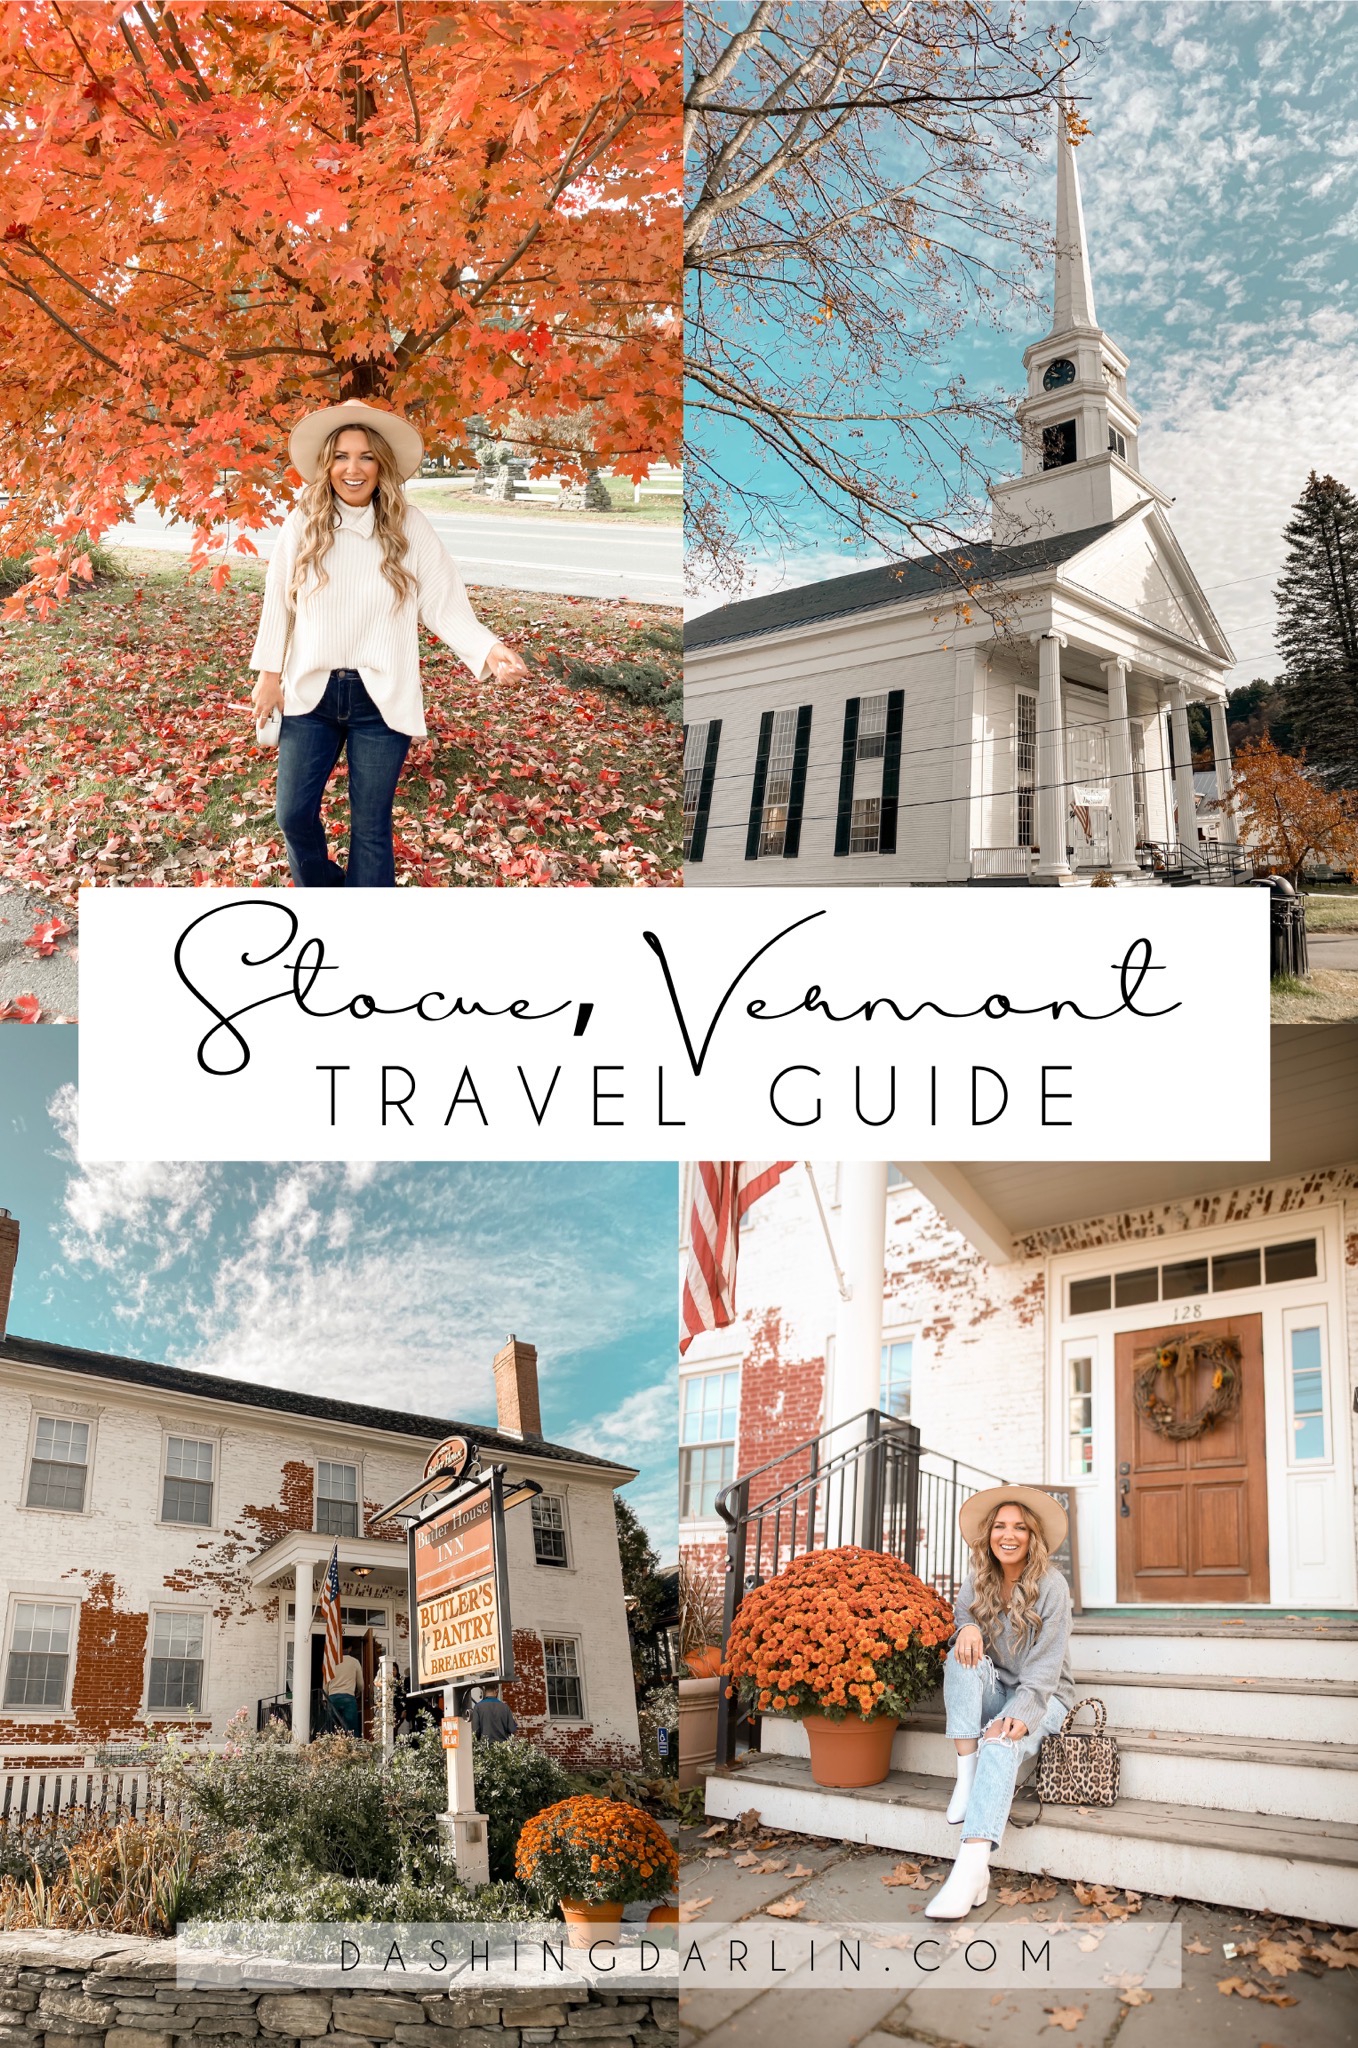 WHERE TO STAY, WHERE TO EAT AND WHAT TO DO - VISITING VERMONT AND OTHER PARTS OF NEW ENGLAND DURING THE FALL IS JUST MAGICAL. SHARING MY FAVORITE SPOTS IN STOWE, VERMONT. AND, FALL FOLIAGE IS JUST THE ICING ON THE CAKE. SEE MORE ON THE BLOG.